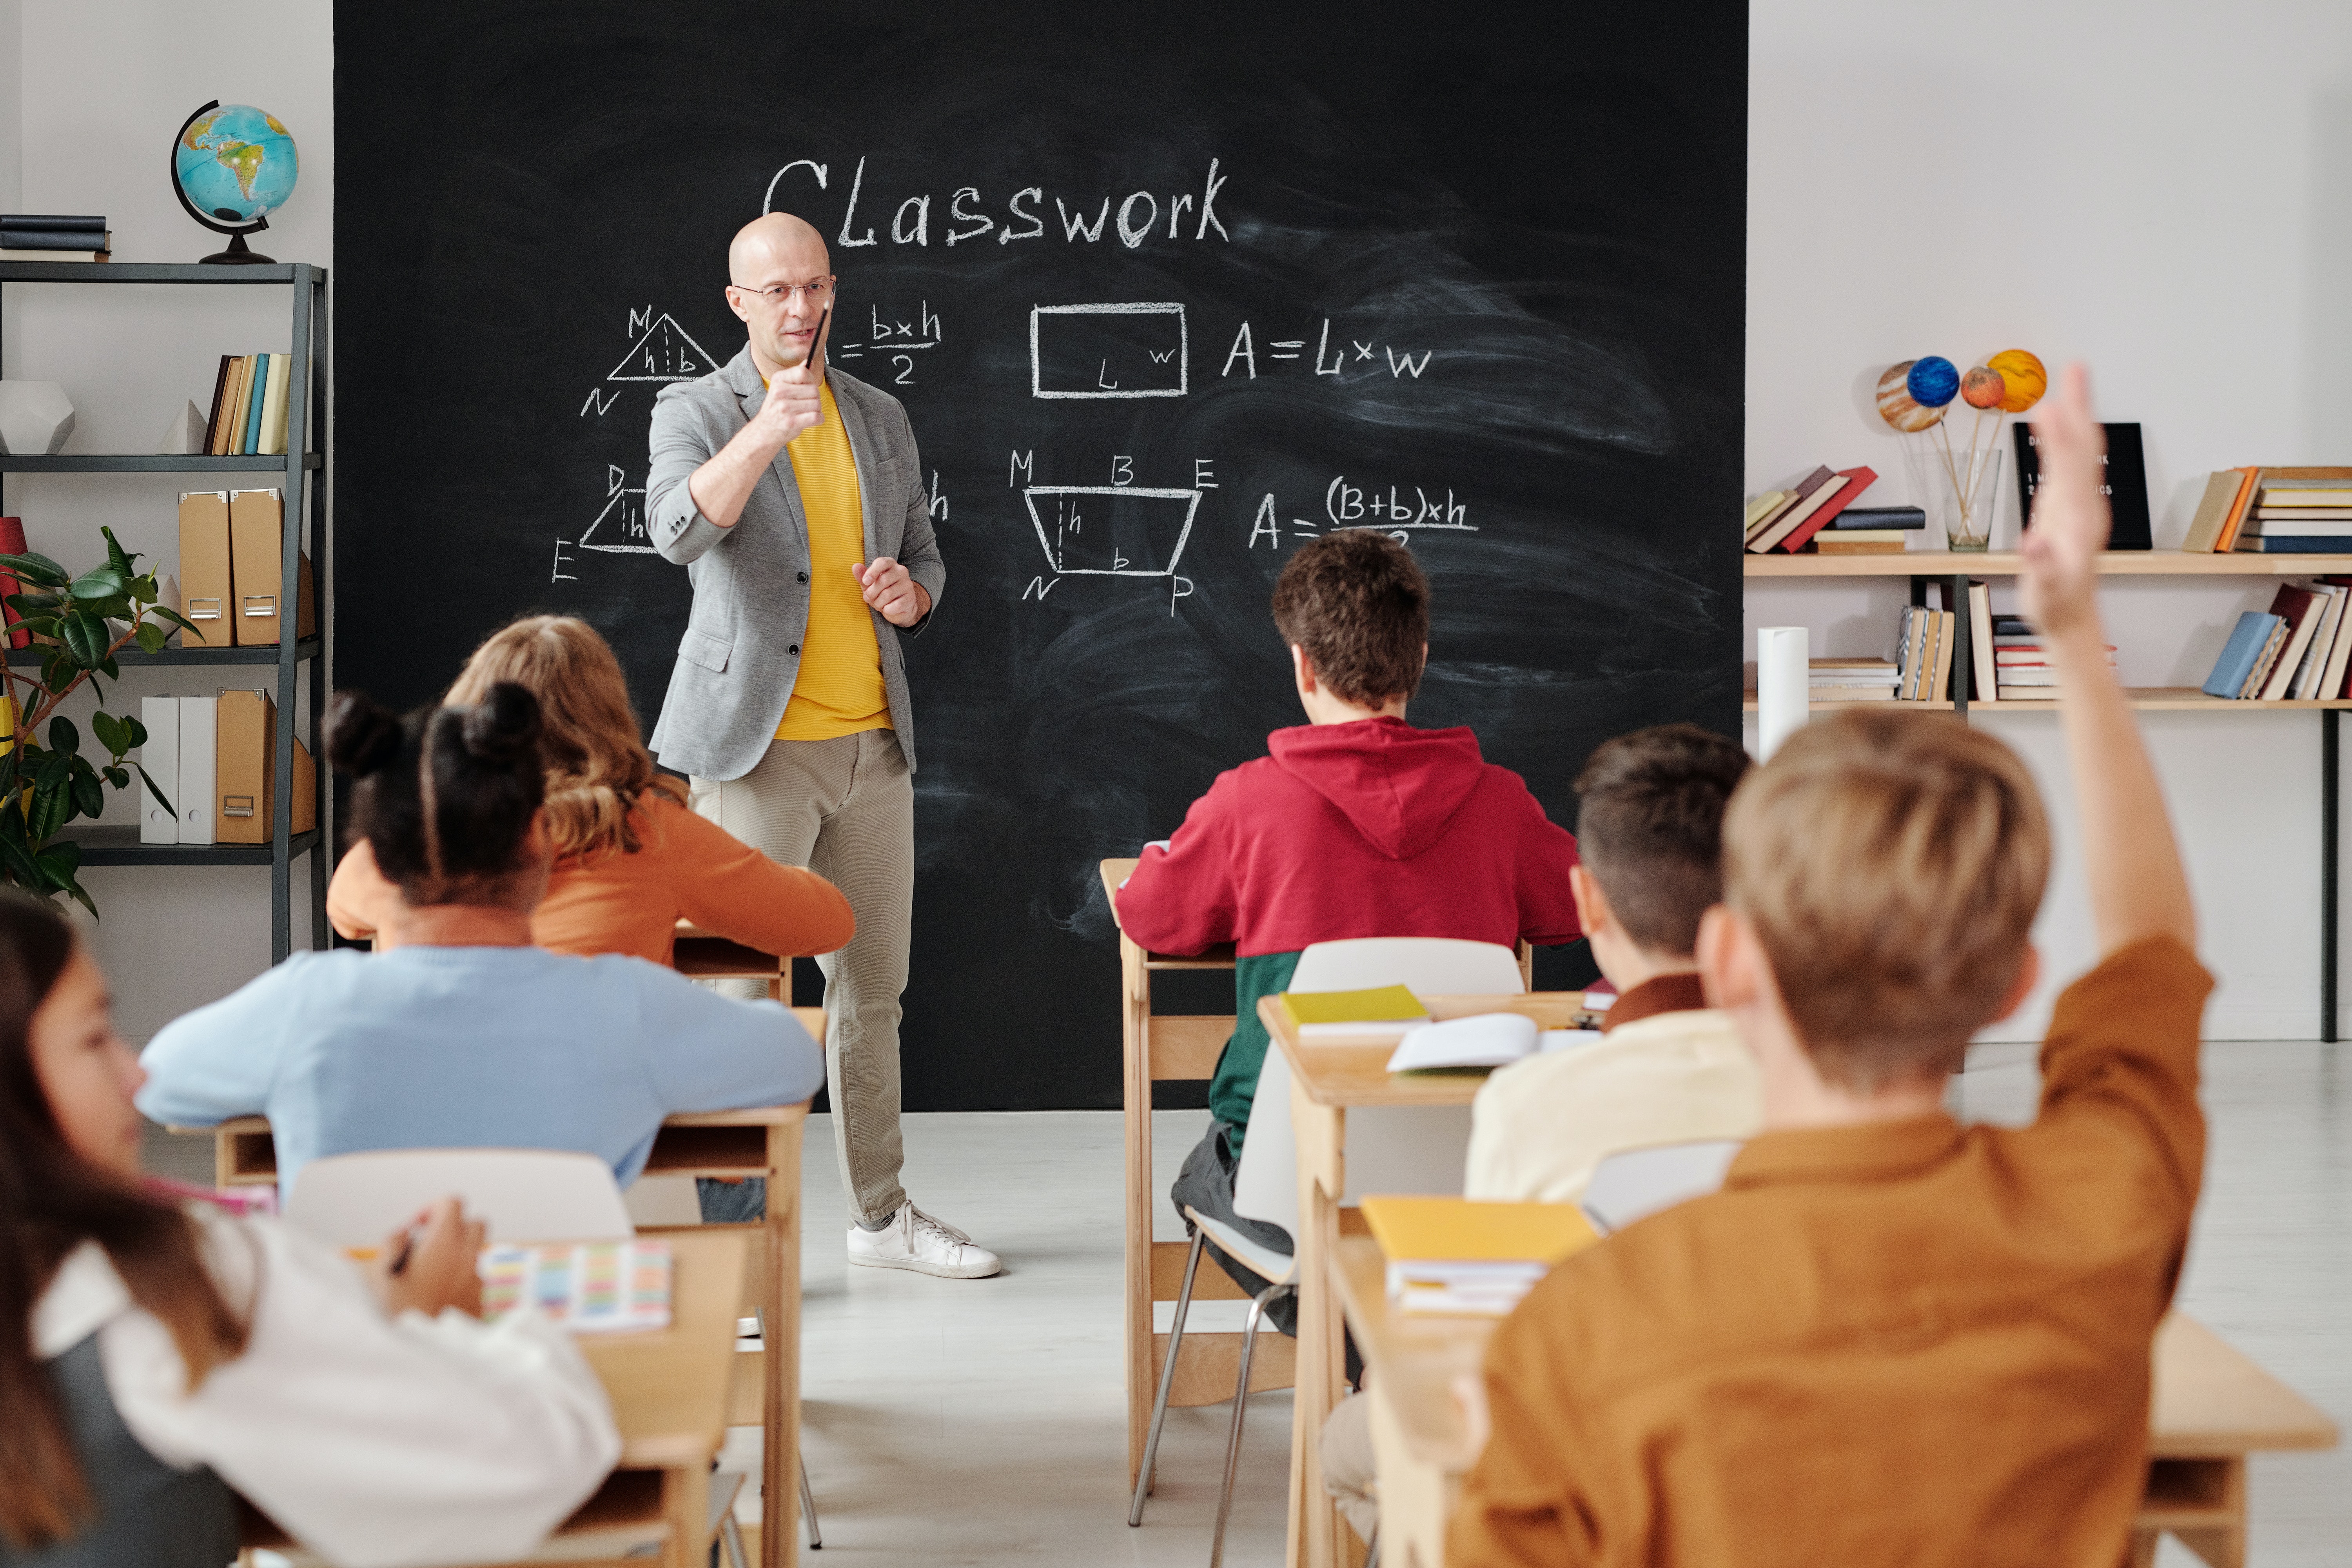 This image shows a teacher in a classroom. He is wearing a grey jacket, a yellow t-shirt, jeans, and white shoes. He is supposedly asking something from the students and one of the students has raised his hands. Behind the teacher, there is a blackboard that mentions " Classwork" and some formulas.